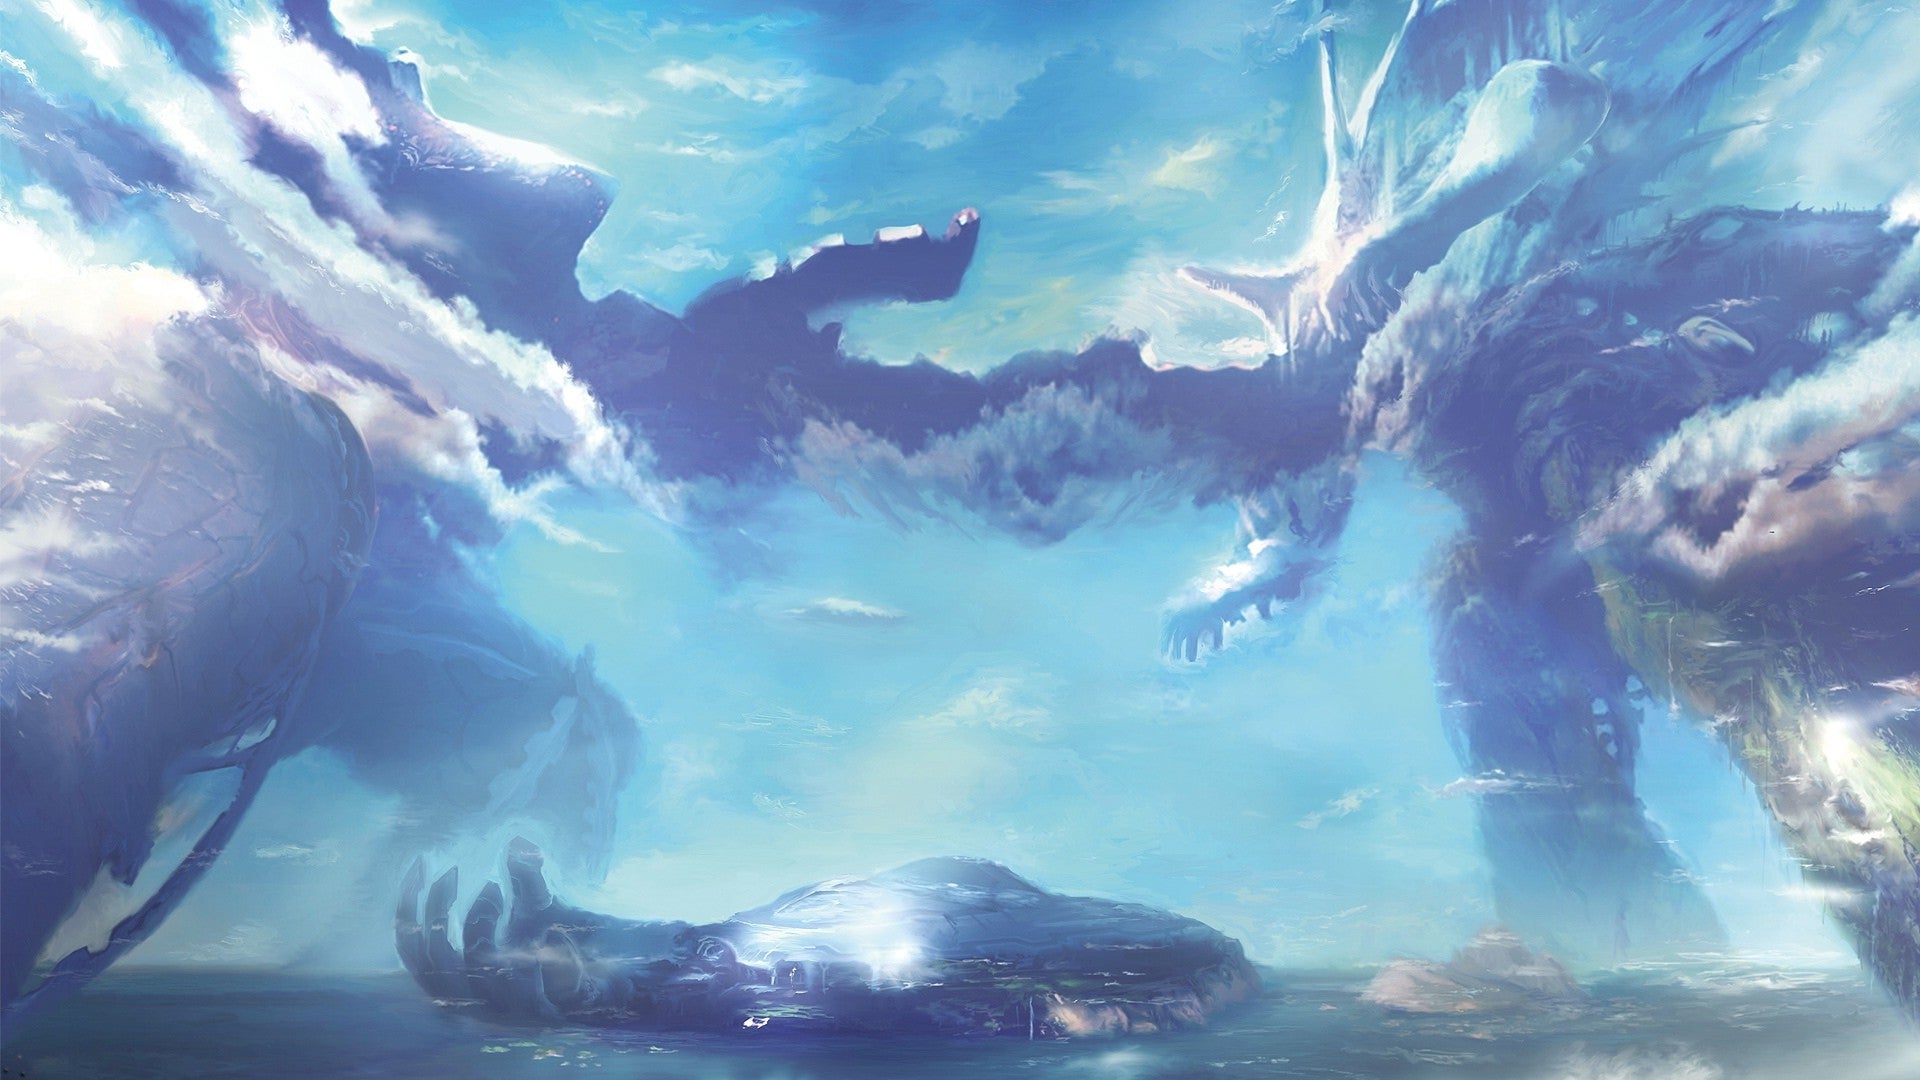 Concept art for Xenoblade Chronicles, featuring the titans Bionis and Mechonis, the bodies of which comprise the game's overworld. (Illustration: Monolith Soft / Nintendo)